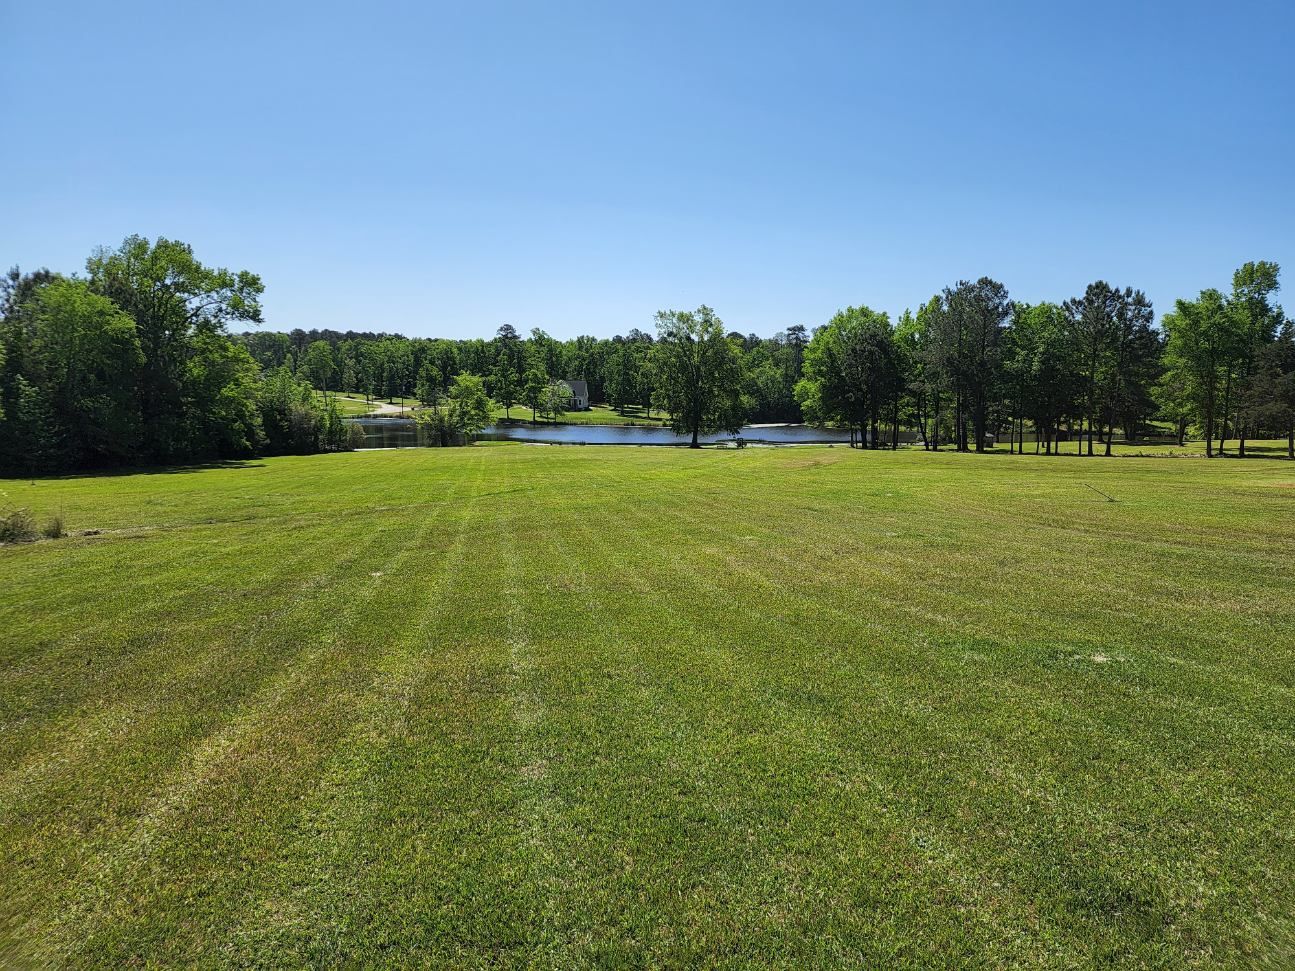 Willow Creek Outdoor Management is the Premier Choice for Lawn Care Service Near Me in the Greater Augusta GA Area